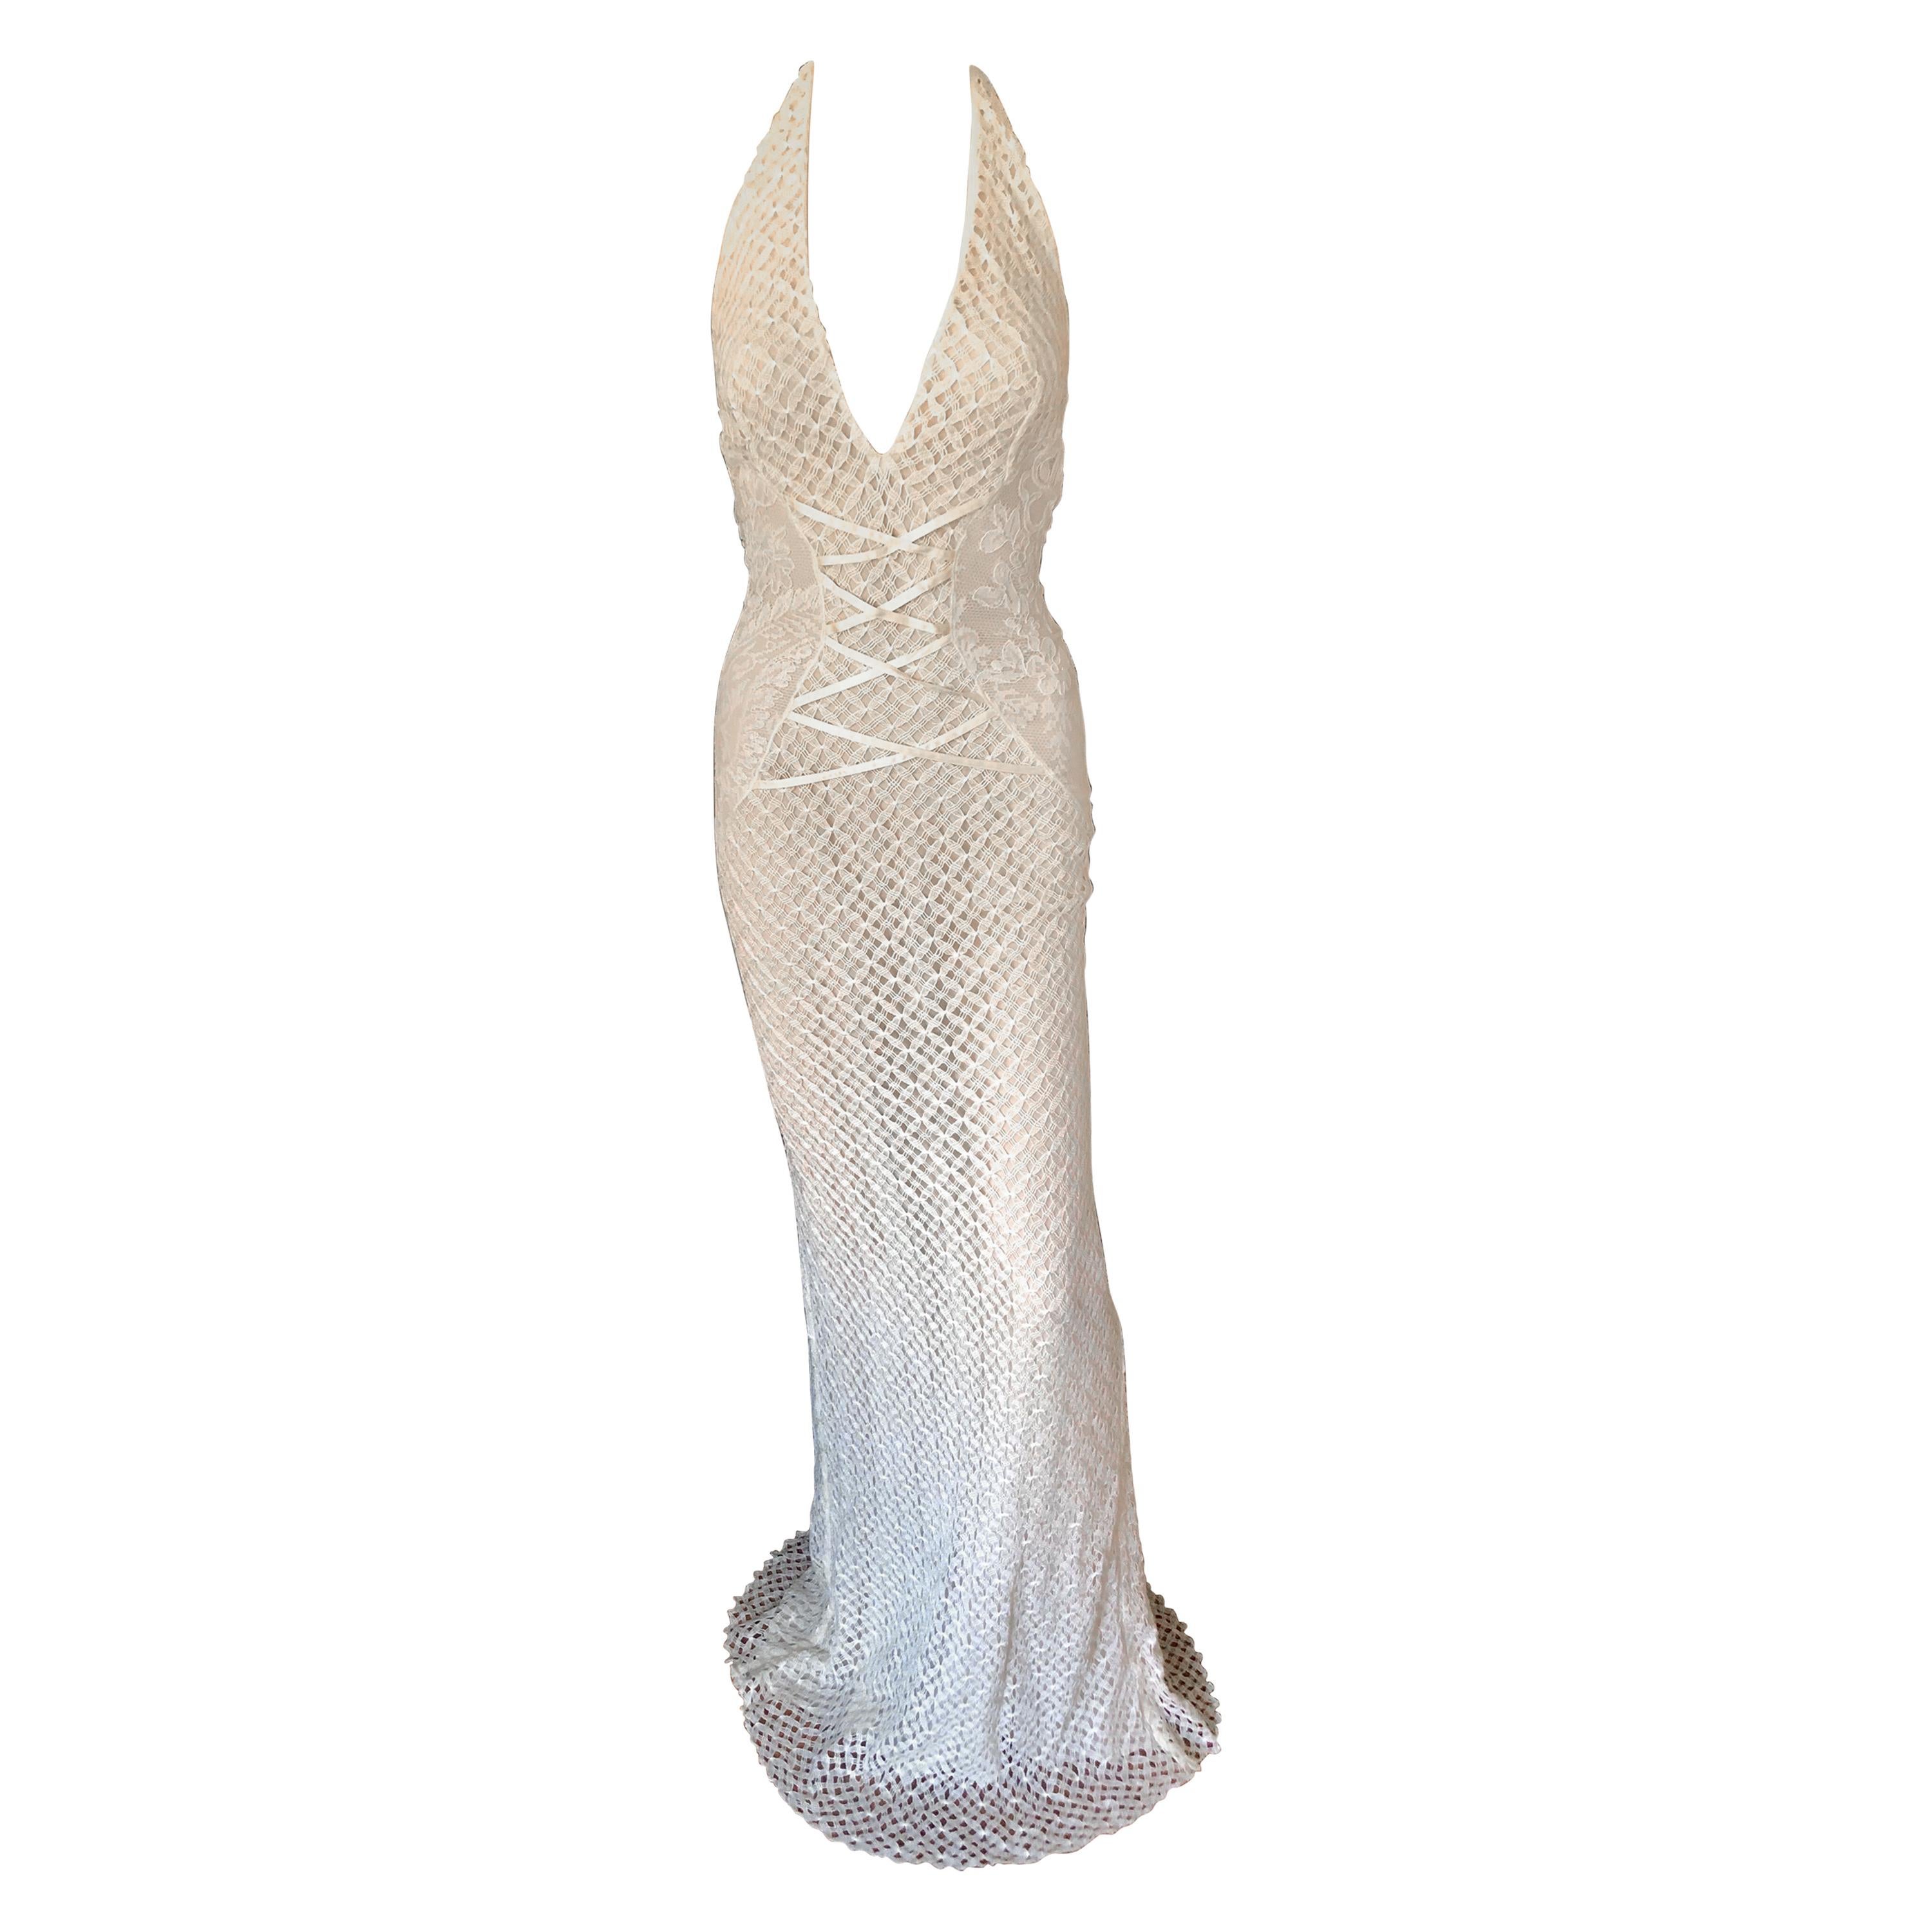 NWT Gianni Versace S/S 2002 Plunging Backless Semi Sheer Lace Ivory Dress Gown For Sale